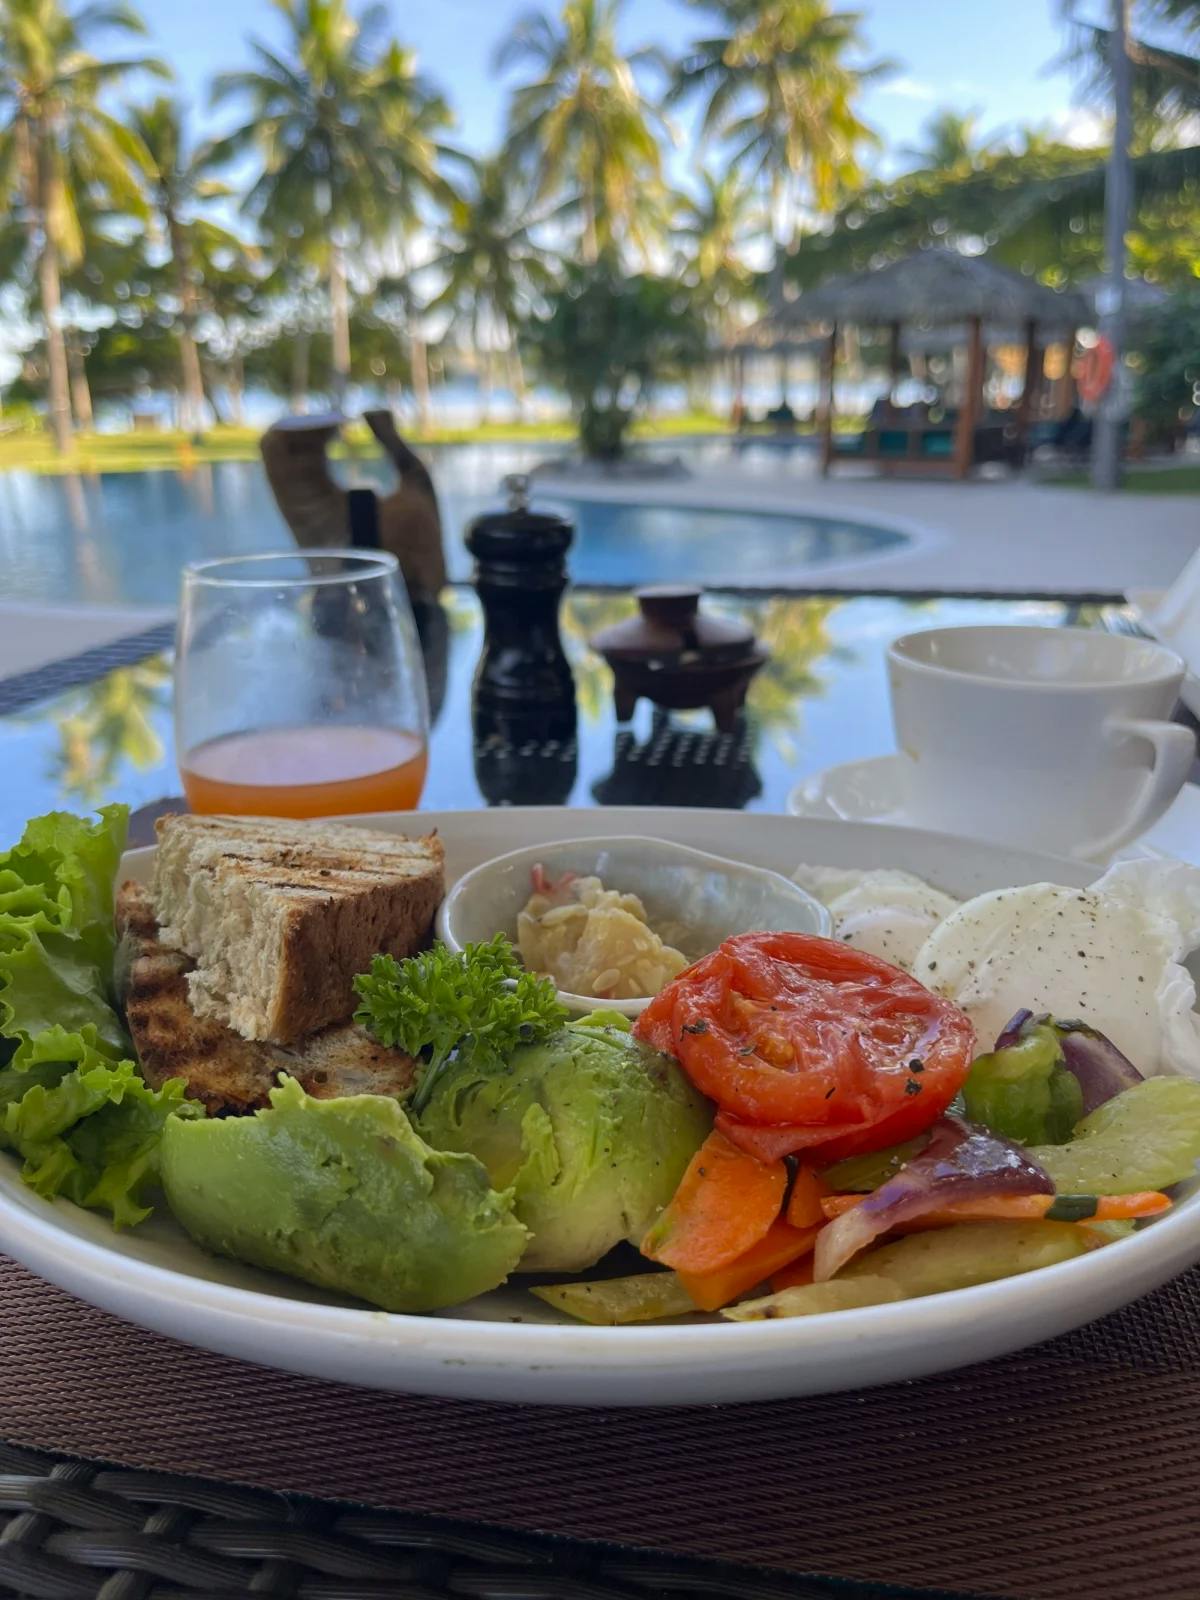 A plate of vegetables on a table overlooking the pool with palm trees in the background